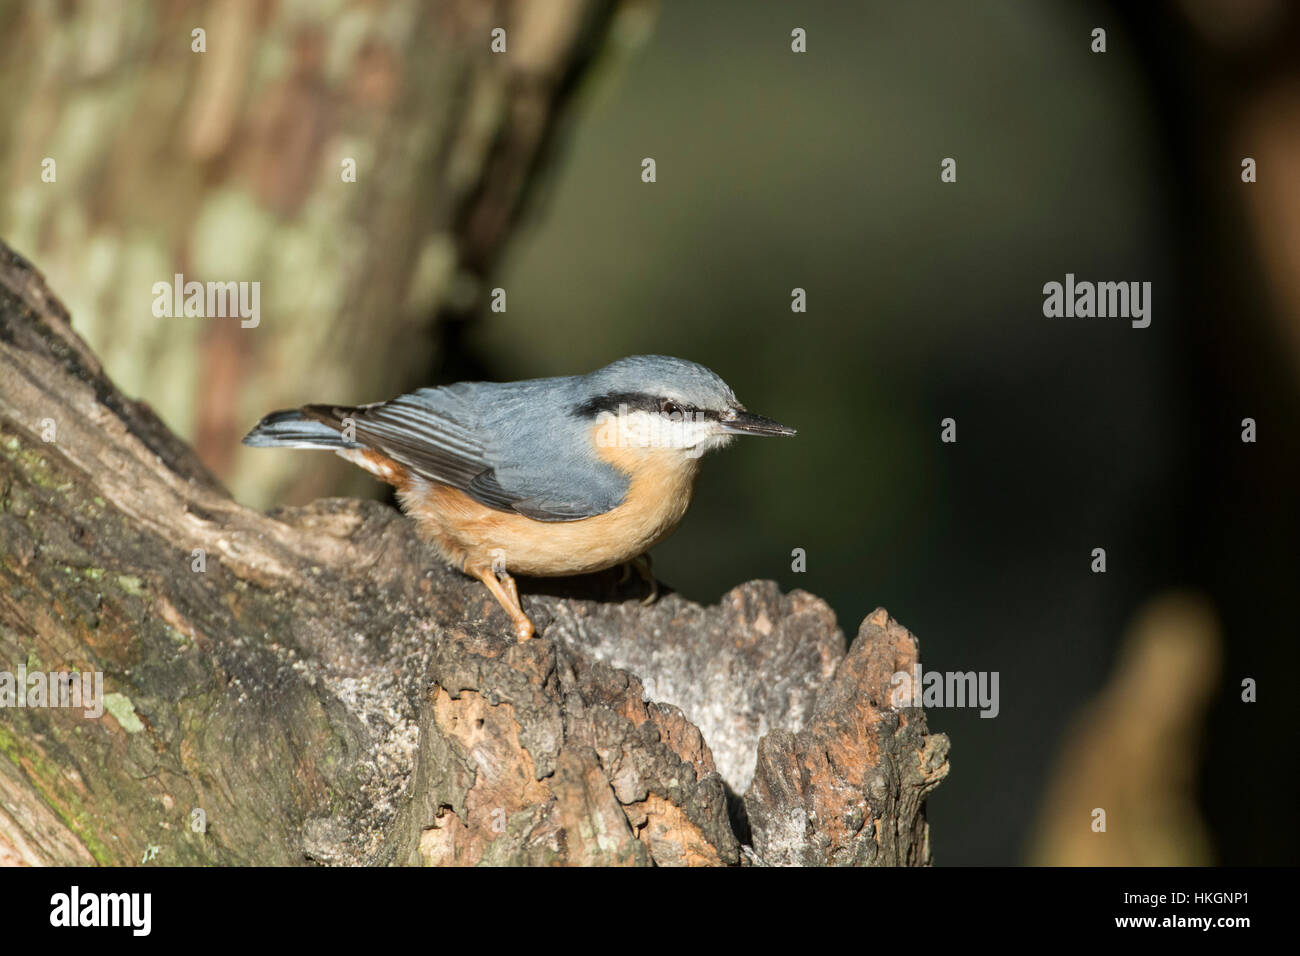 Nuthatch (Sitta europaea) foraging for food on a tree stump. Stock Photo